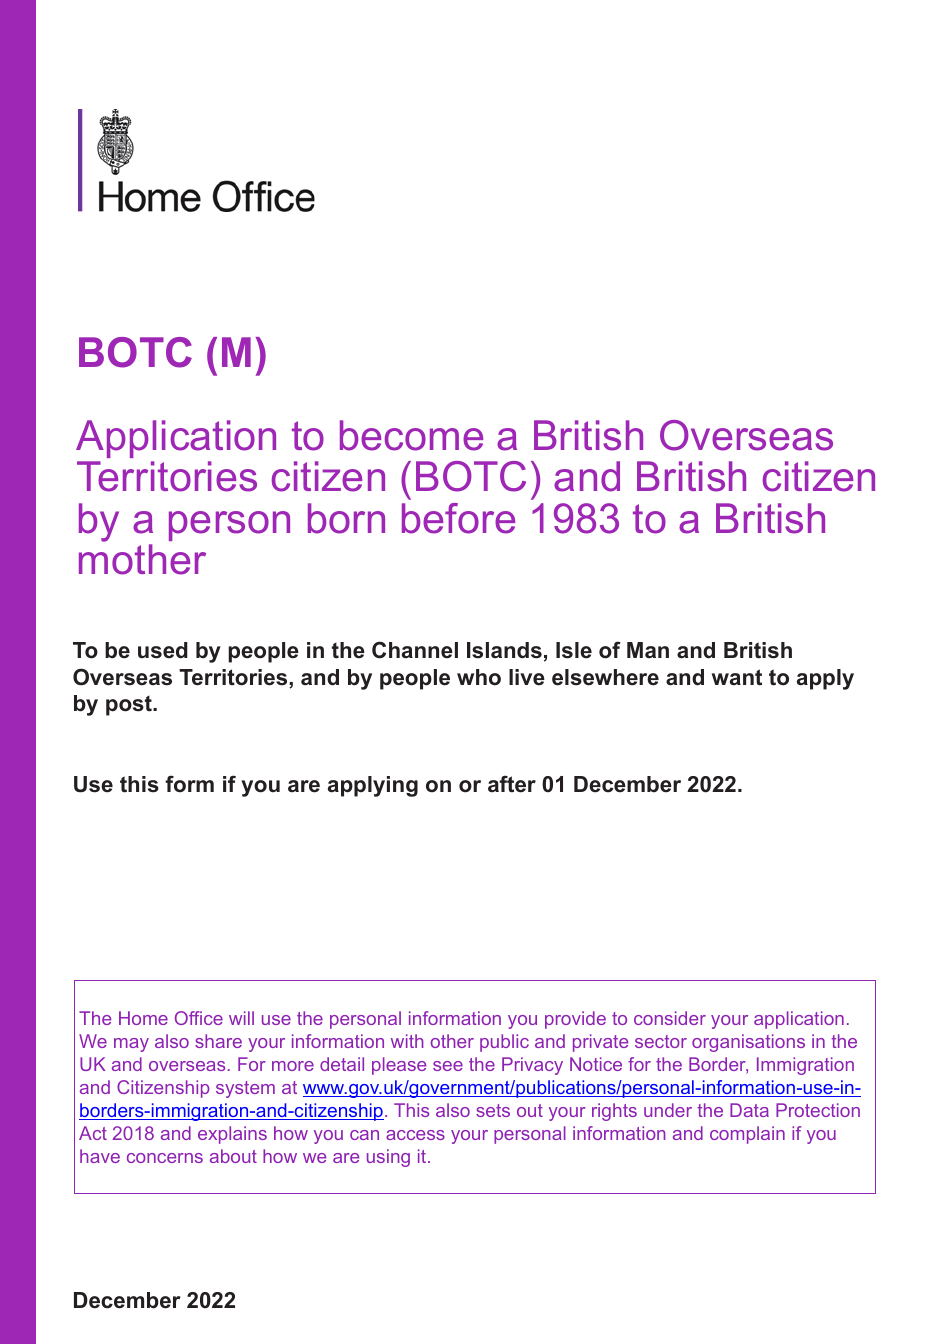 Form BOTC (M) Application to Become a British Overseas Territories Citizen (Botc) and British Citizen by a Person Born Before 1983 to a British Mother - United Kingdom, Page 1